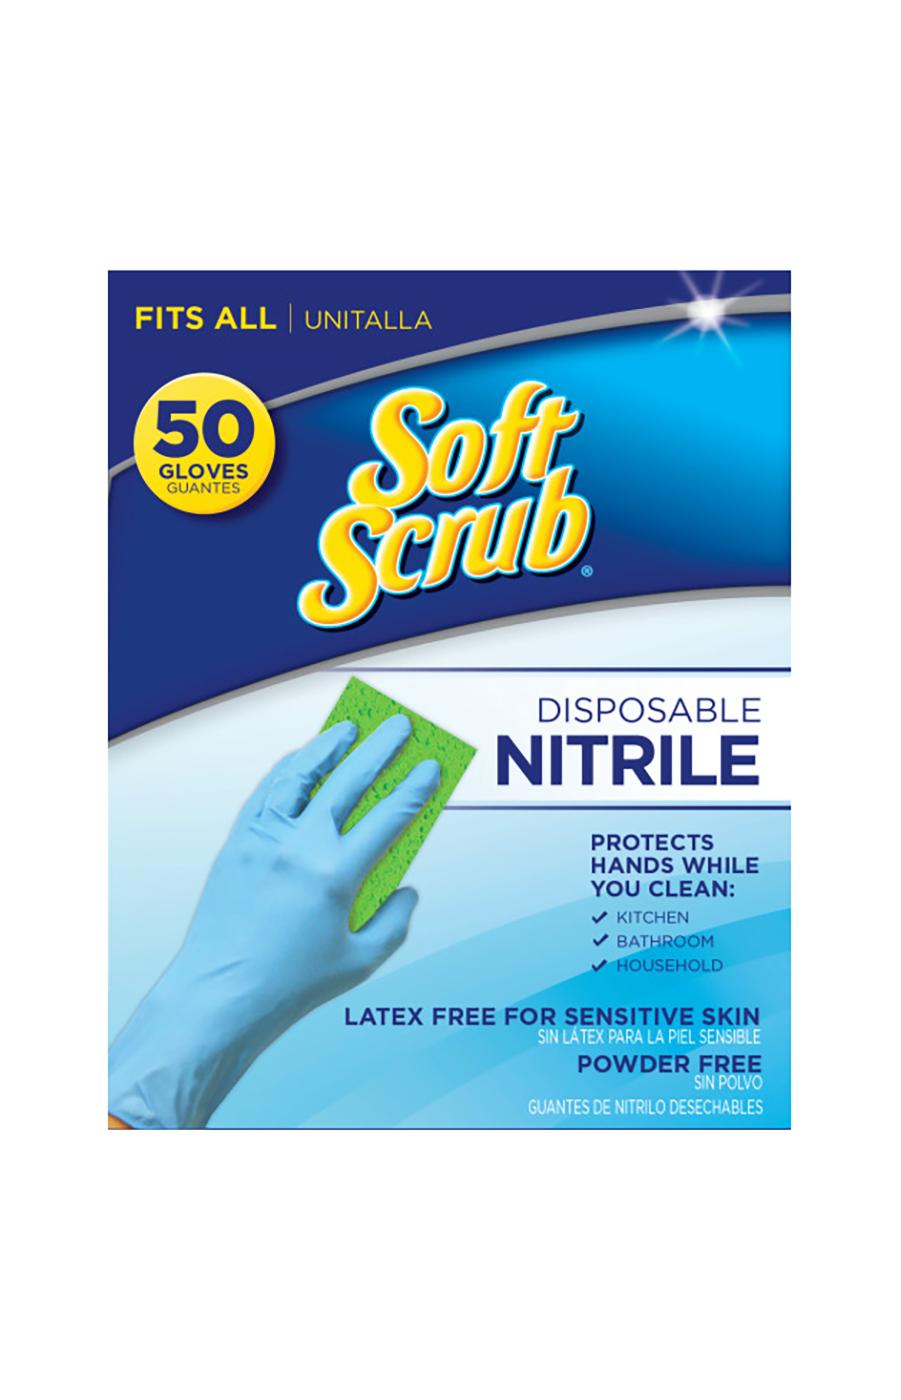 Soft Scrub Disposable Nitrile Gloves; image 1 of 2